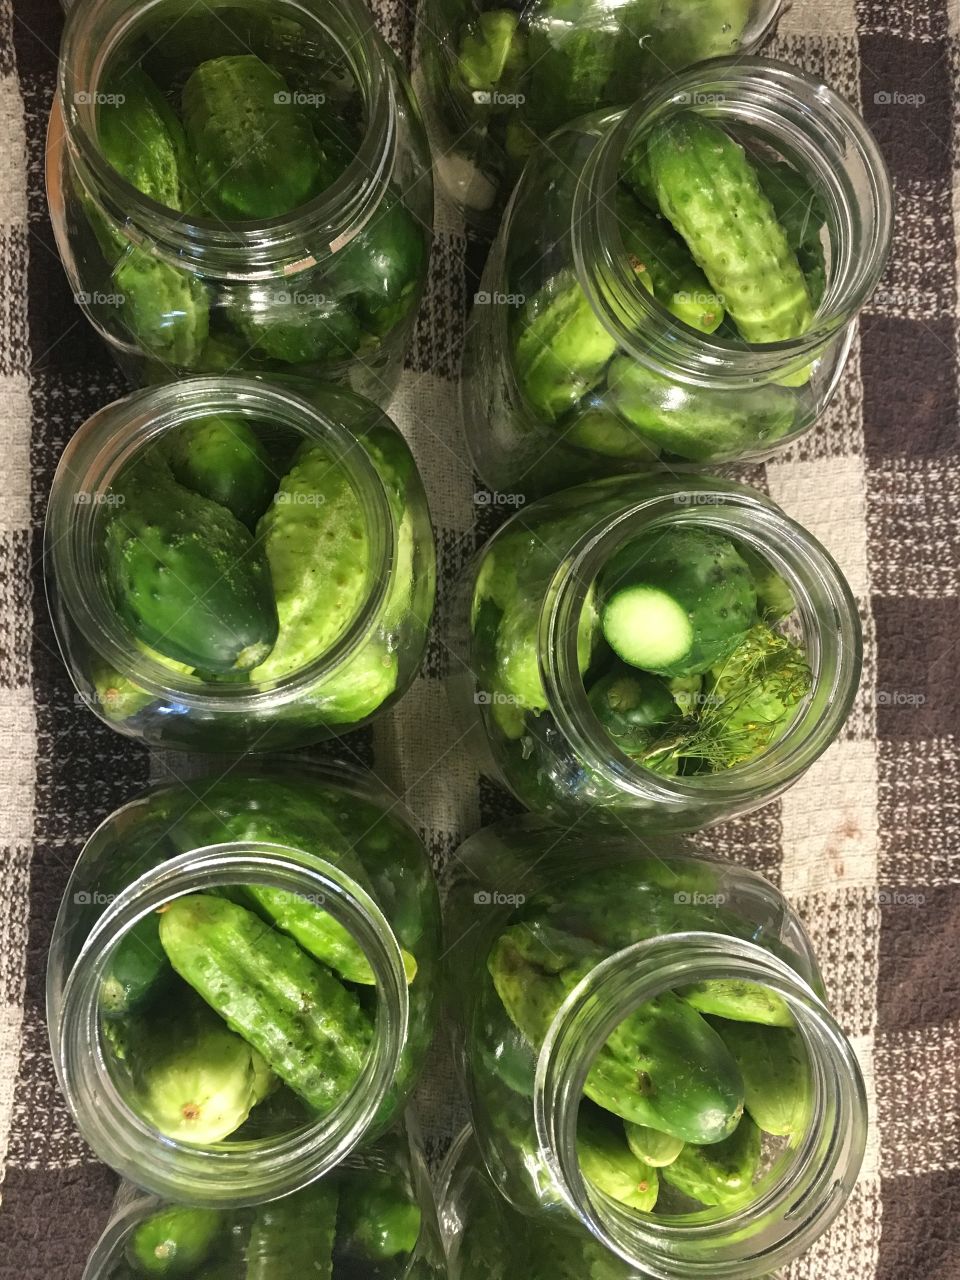 Cucumbers in jars and ready for brine